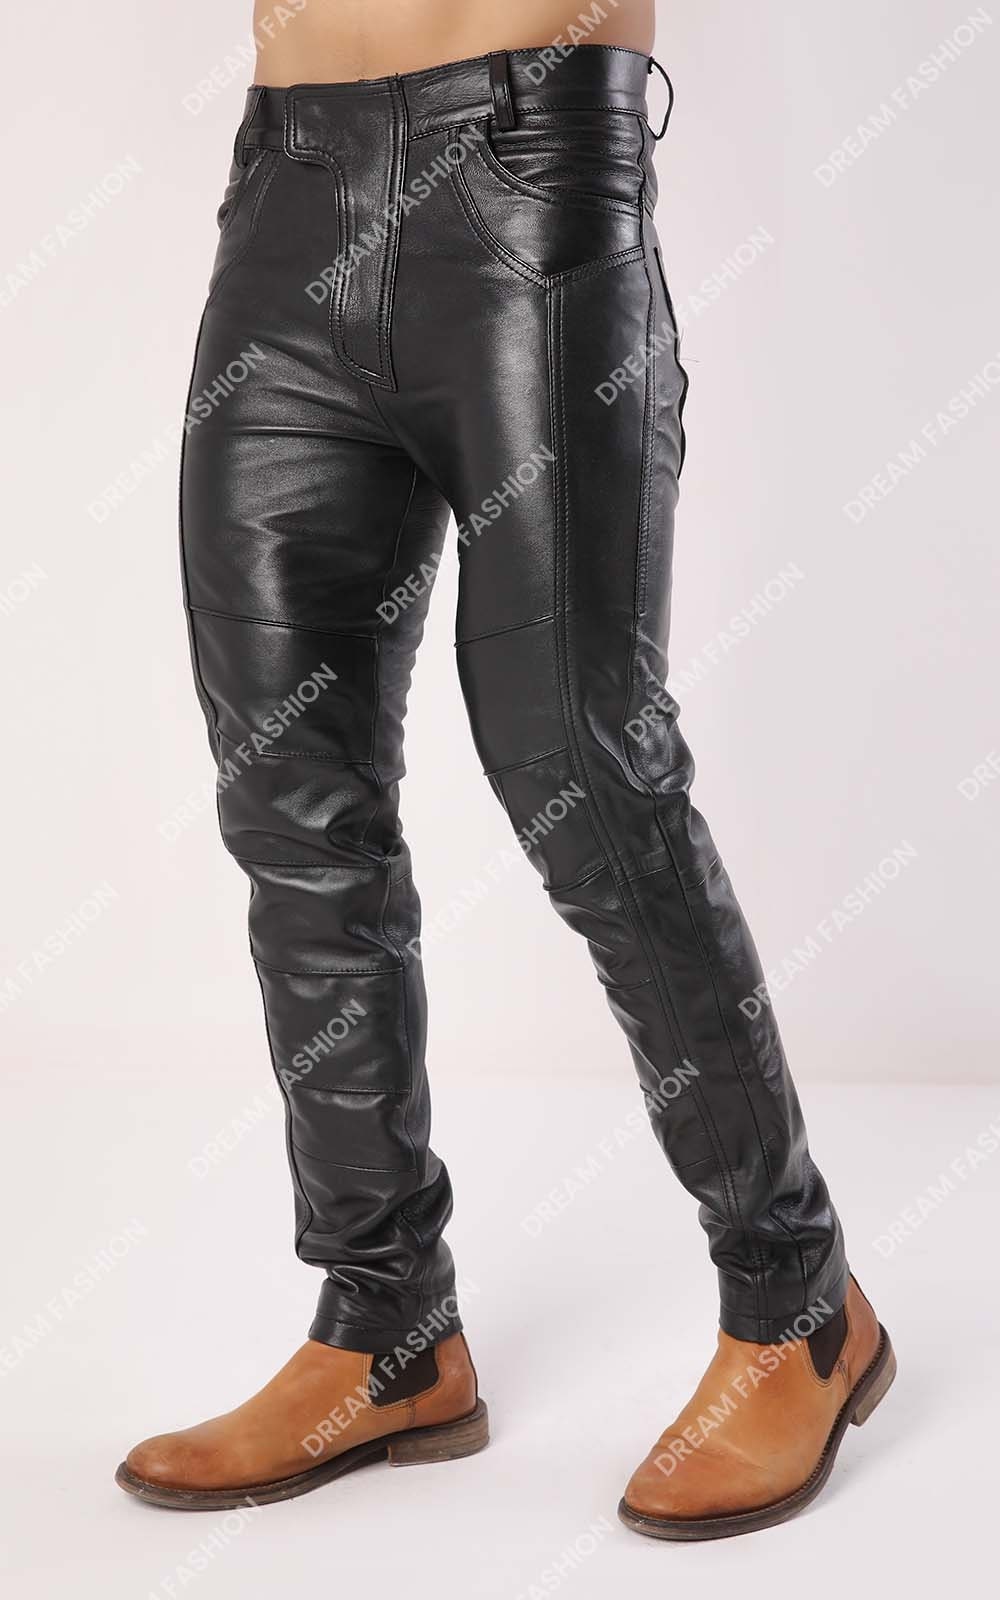 Men's Real Black Leather Pants Cargo 6 Pockets Pants Bikers Jeans Leather  Trousers W28 X L28 at  Men's Clothing store